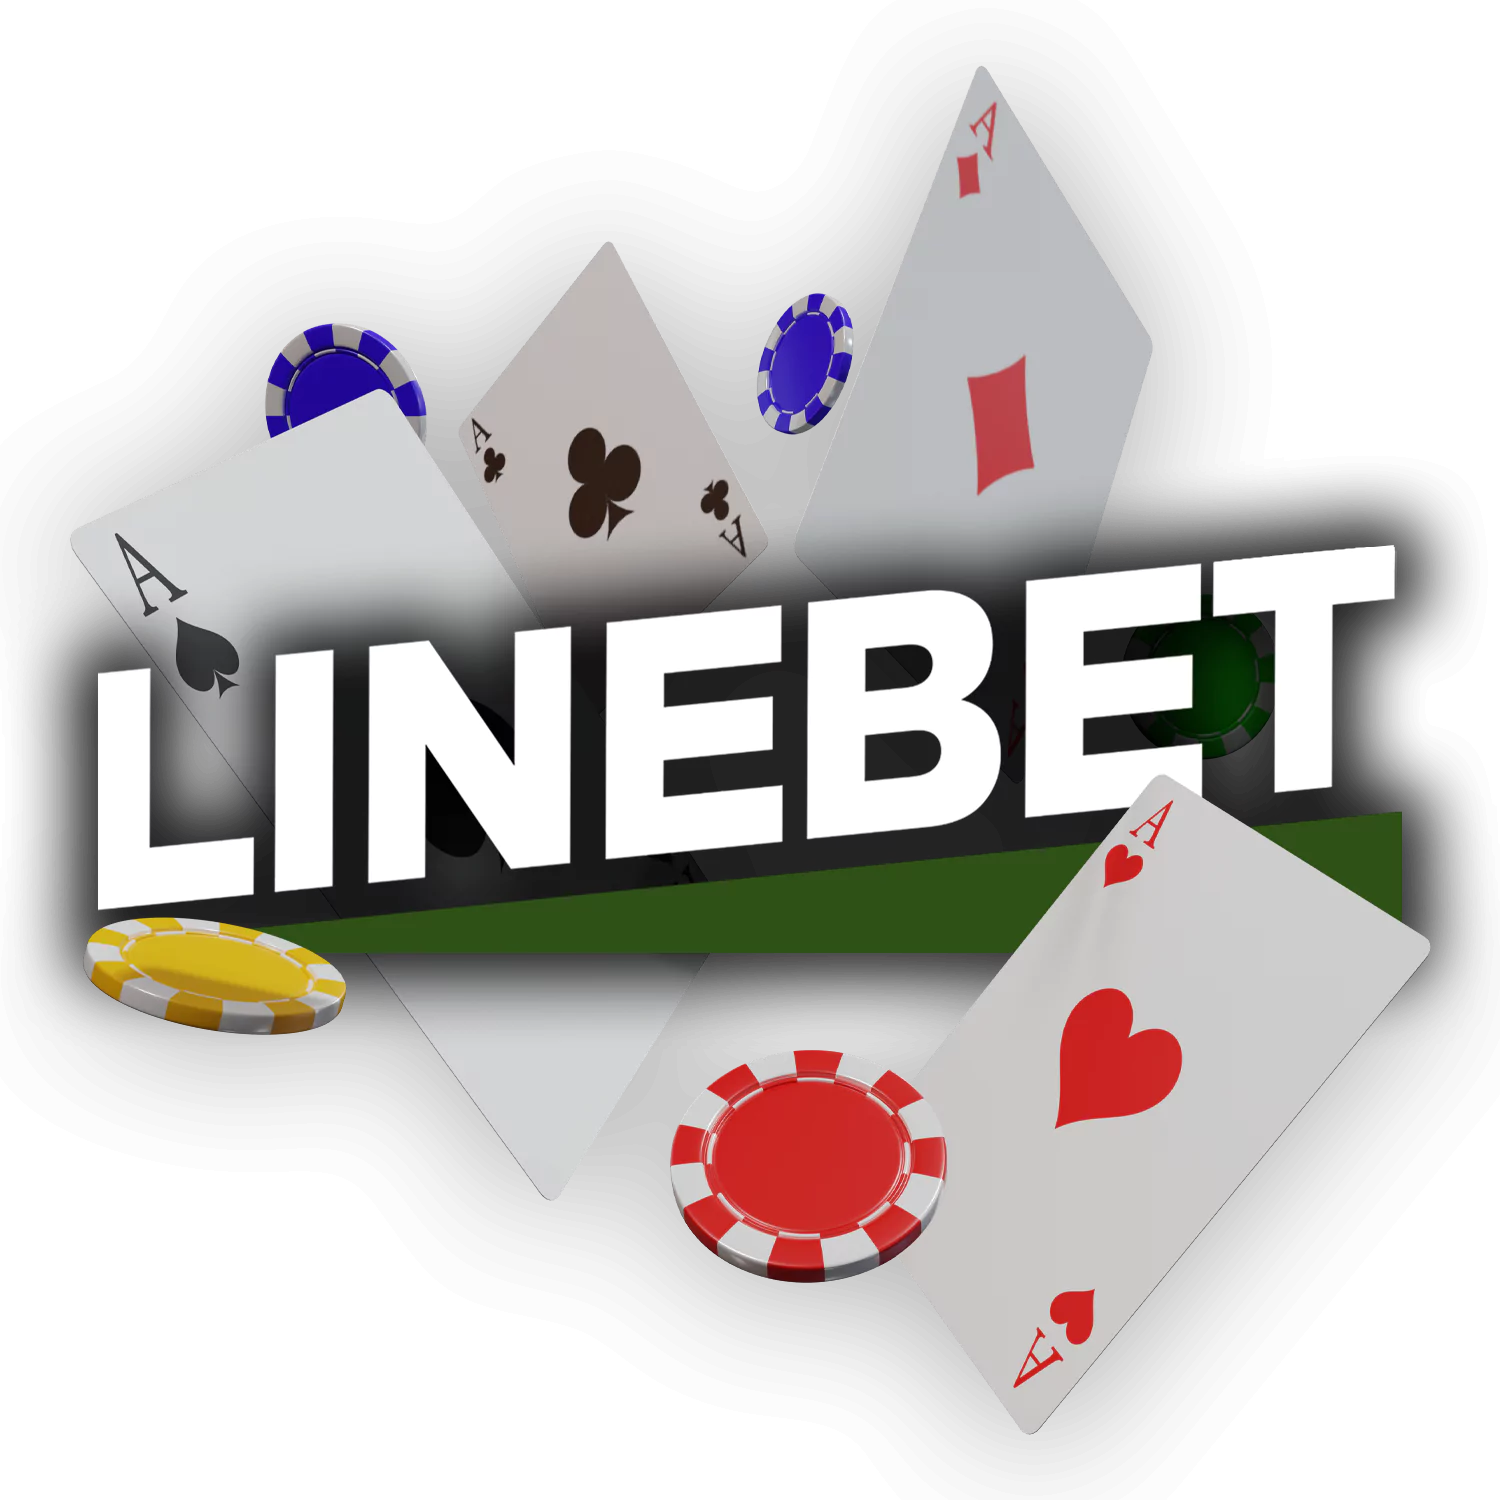 Learn how to play poker in the Linebet Live Casino.